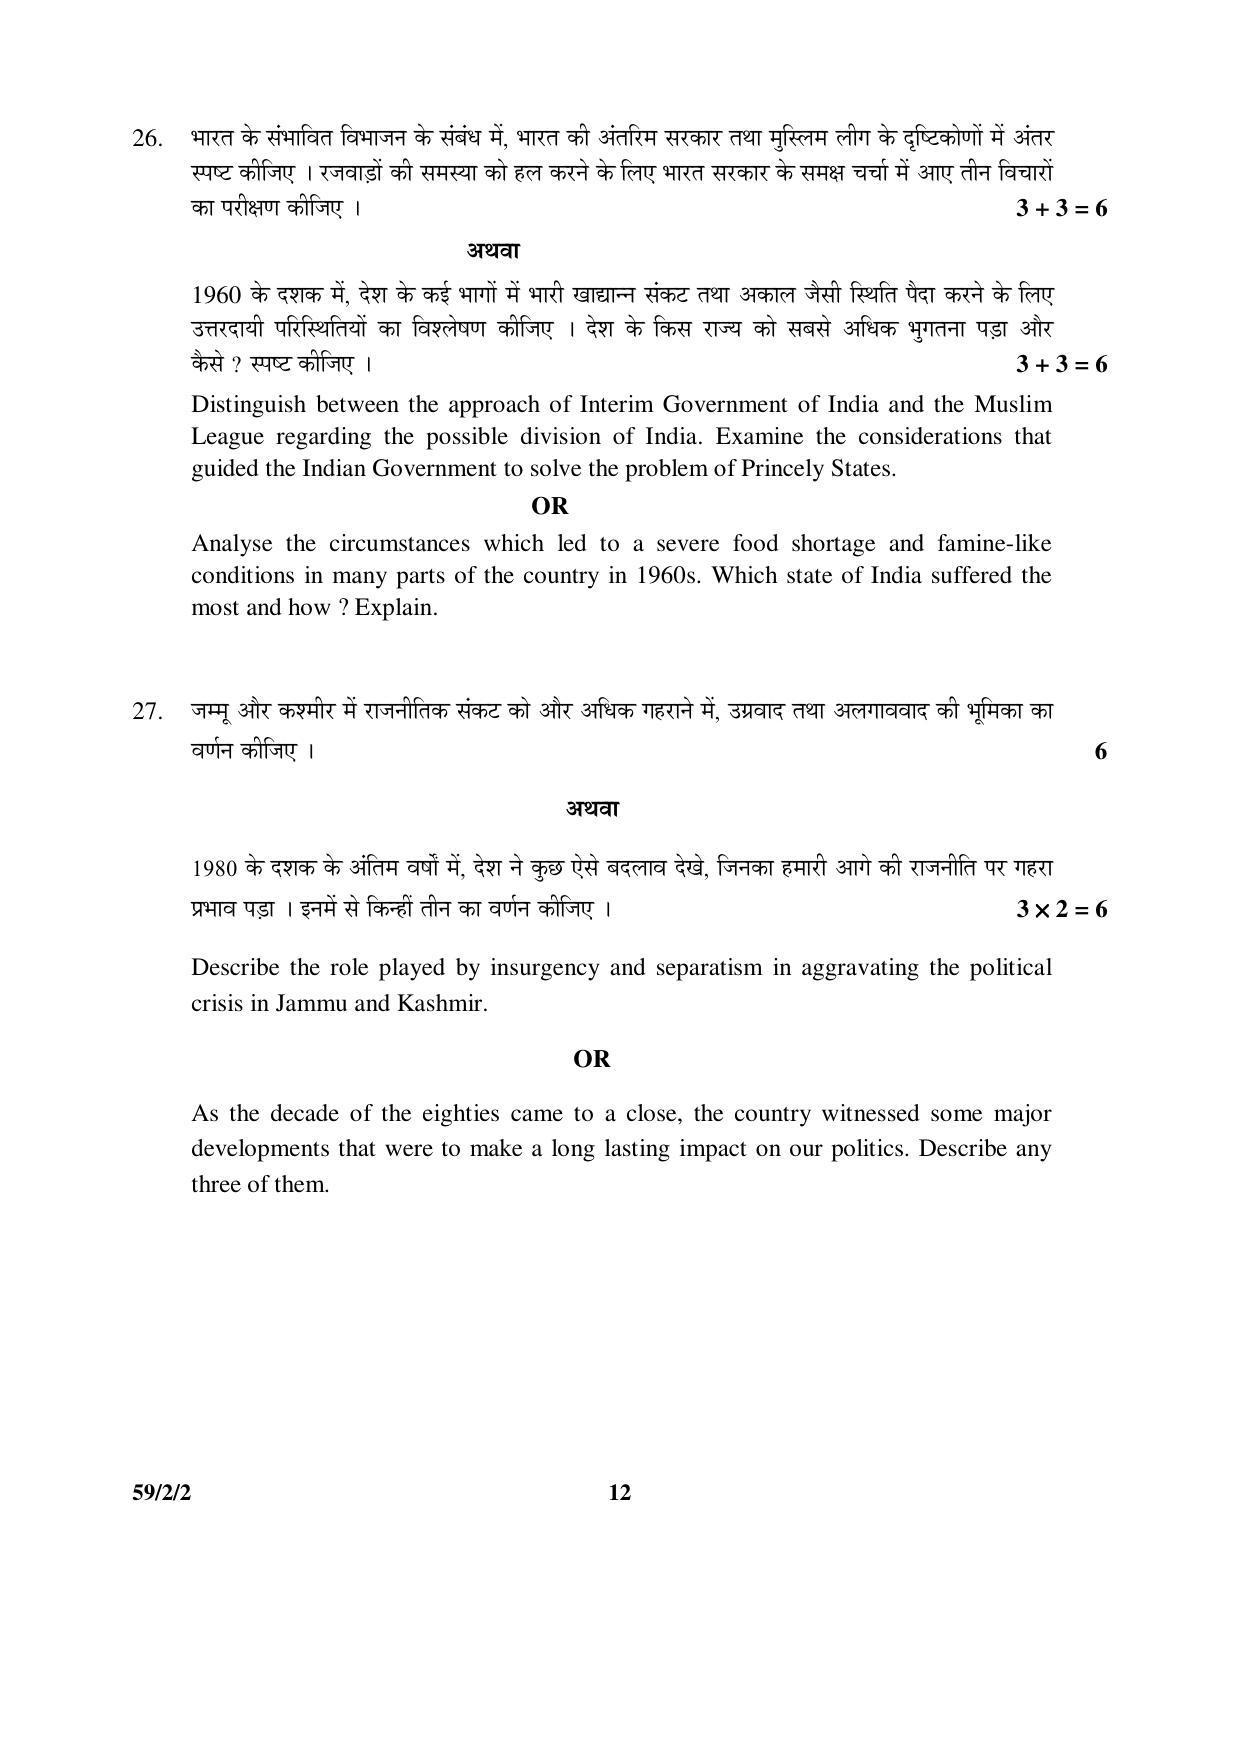 CBSE Class 12 59-2-2 _Political Science 2016 Question Paper - Page 12